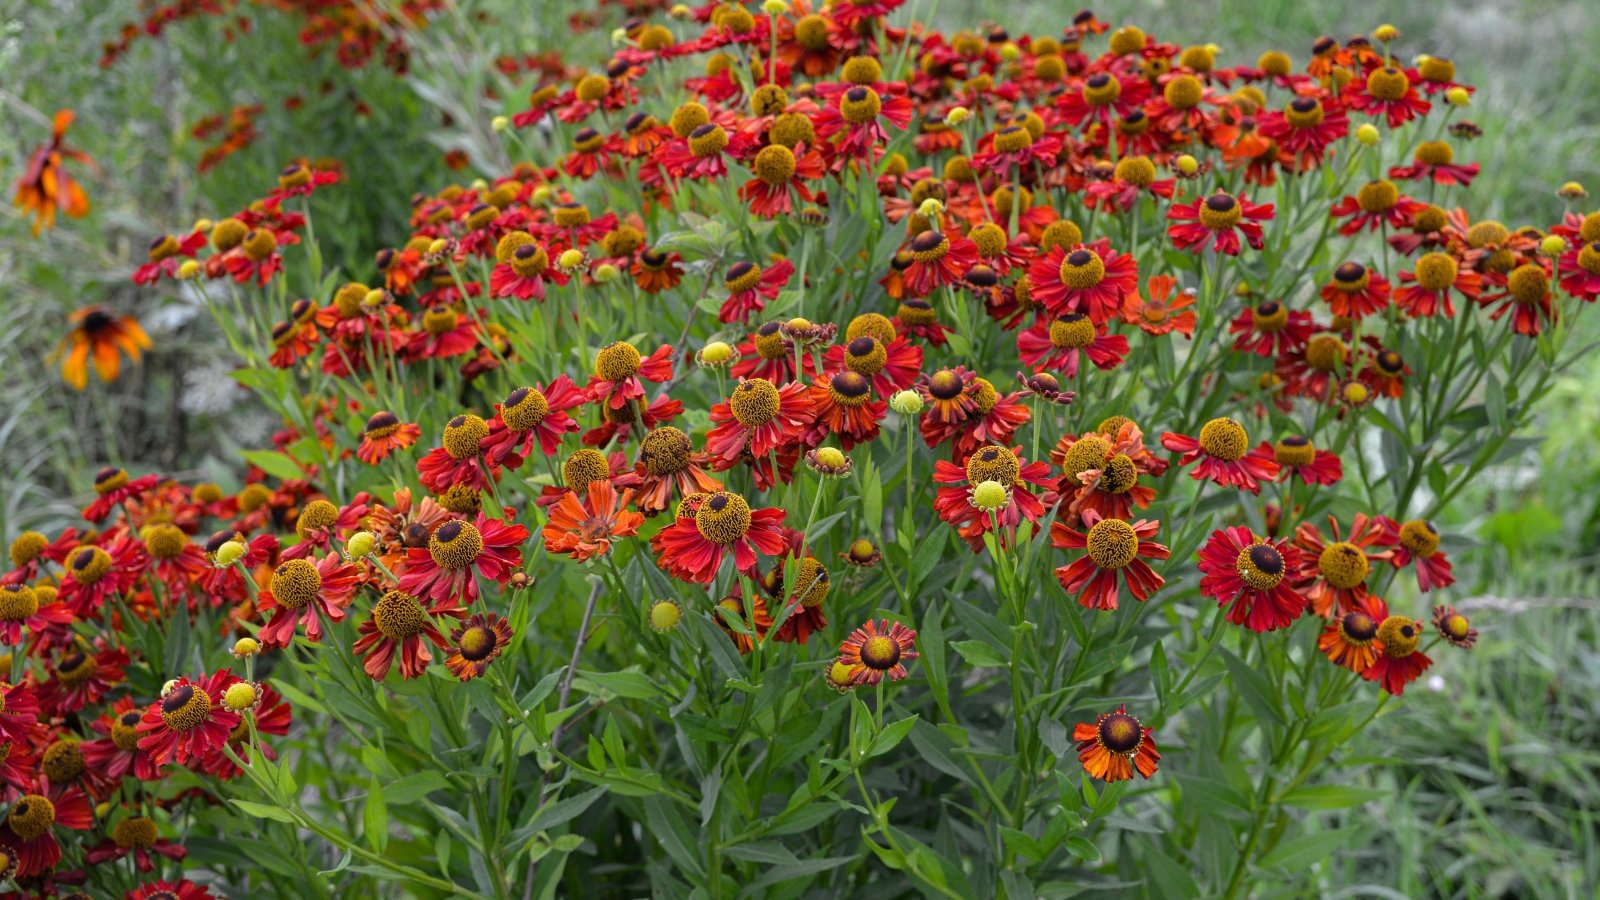 The Helenium plant features sturdy stems and lance-shaped leaves that serve as a backdrop to its vibrant, daisy-like flowers of bright orange-red with prominent cone-shaped centers.